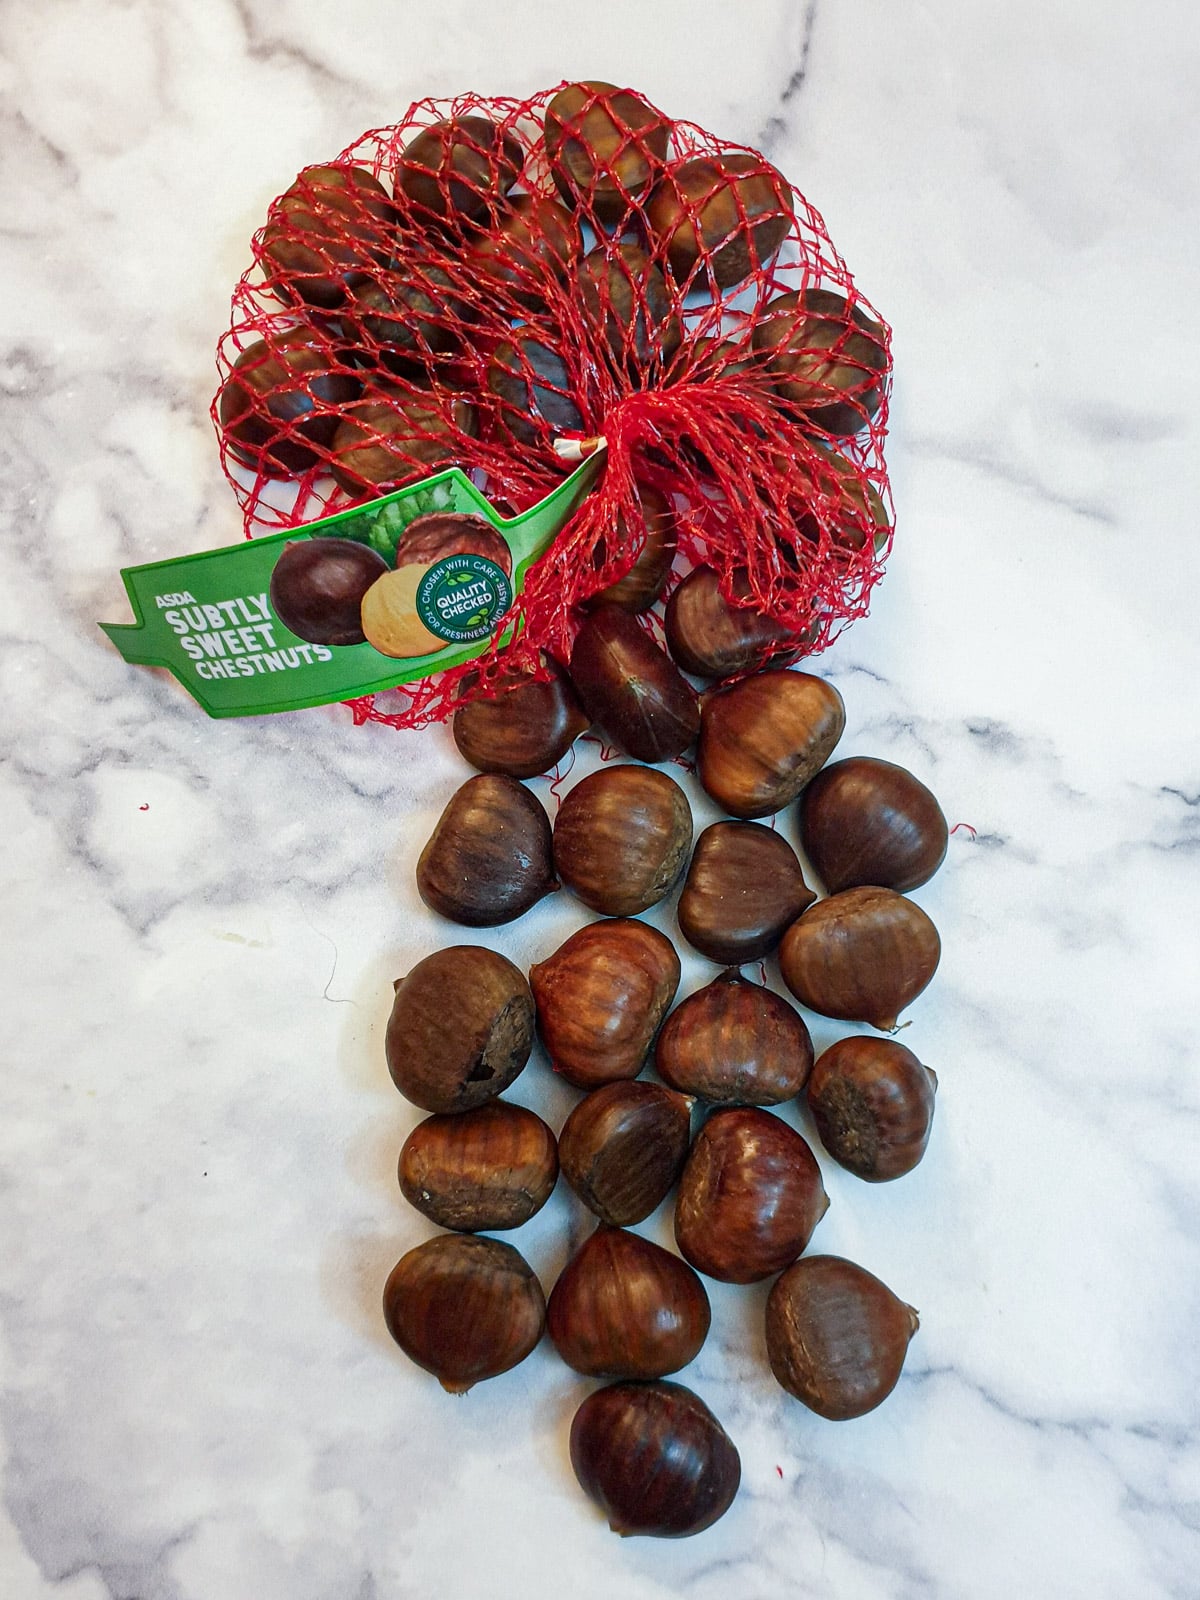 A red net bag of chestnuts, on a marble worktop with some of the chestnuts spilling out.